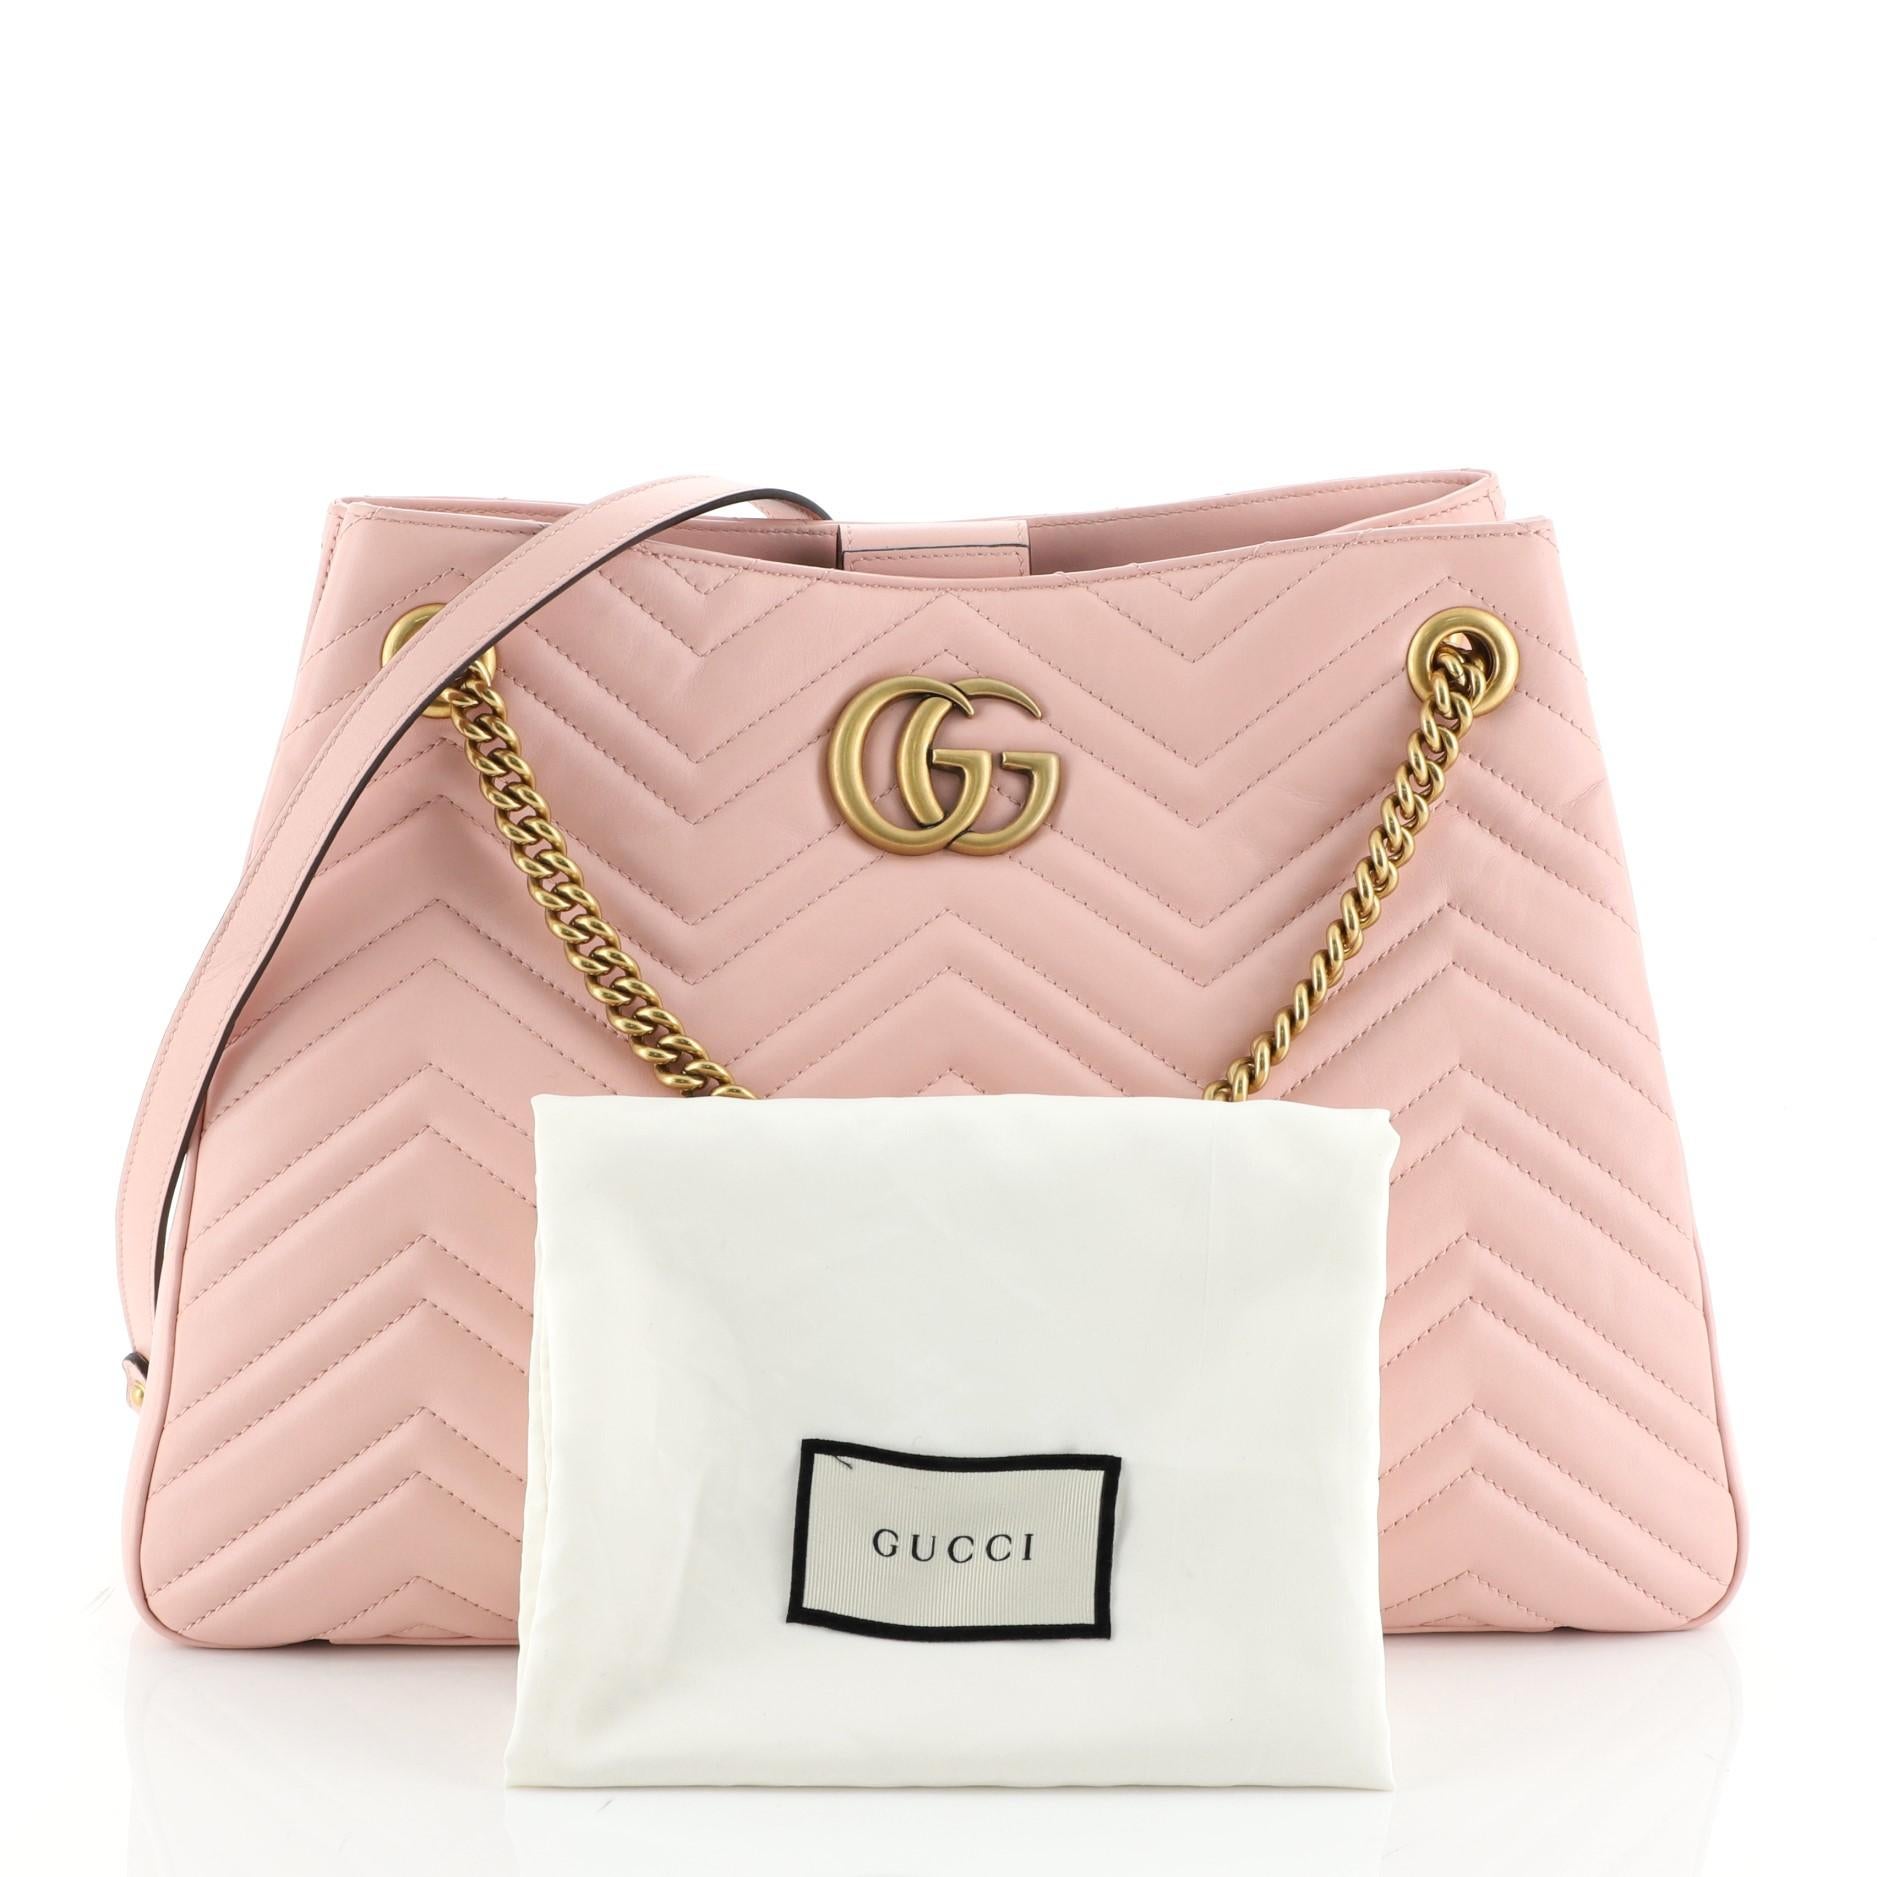 This Gucci GG Marmont Chain Shoulder Bag Matelasse Leather, crafted from pink matelasse leather, features chain strap with leather pad, interlocking GG logo, and matte gold-tone hardware. Its hidden magnetic snap closure opens to a gray microfiber